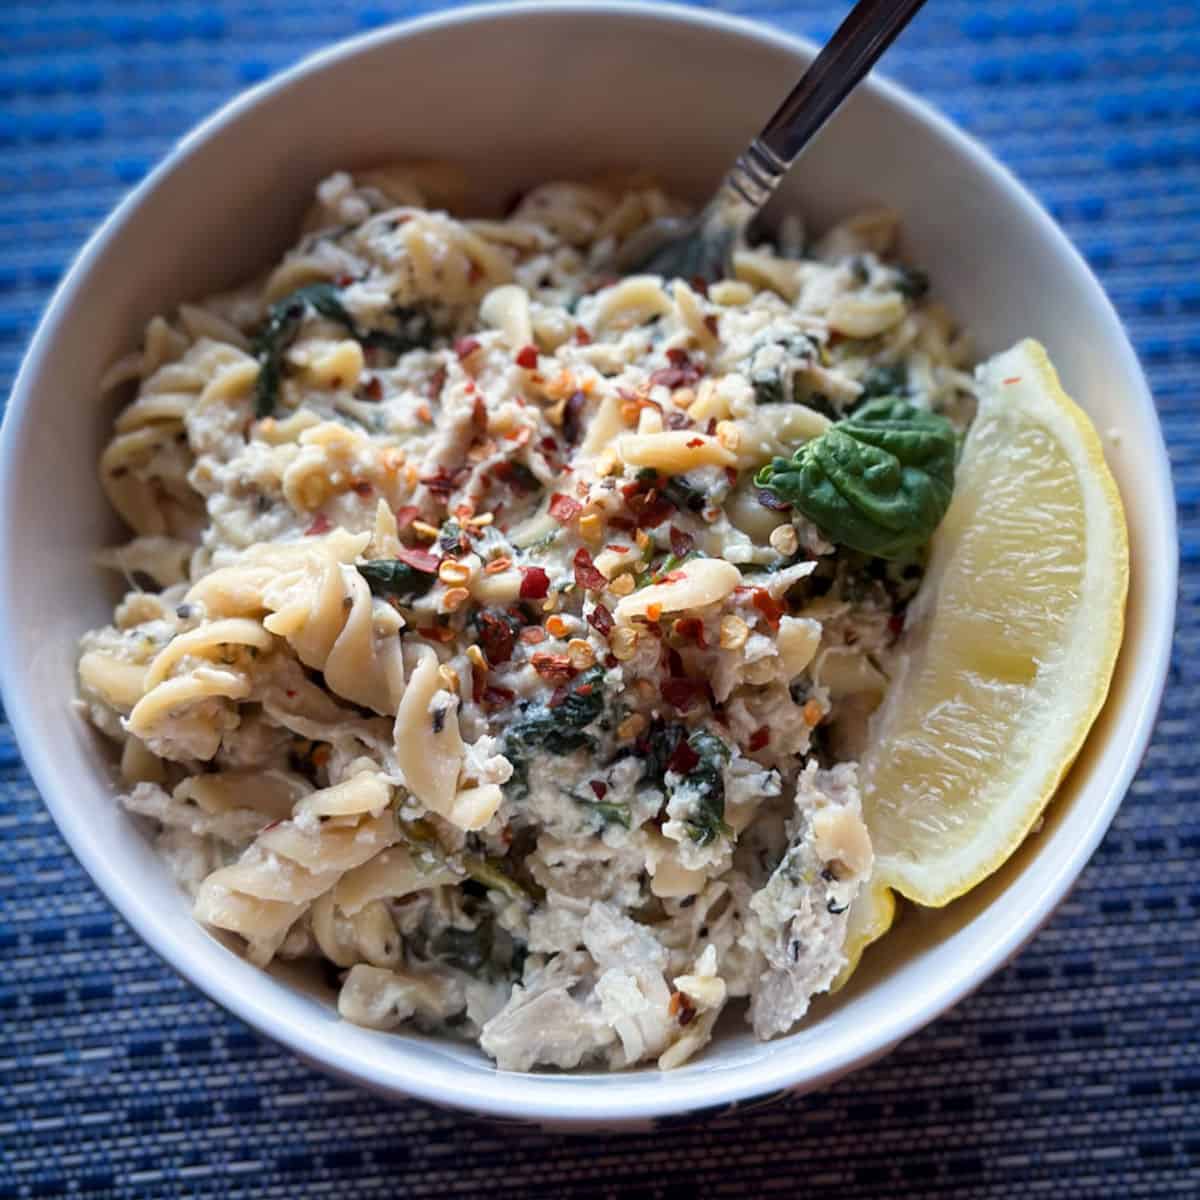 a bright blue placemat with a white bowl and creamy lemon ricotta pasta with chicken spinach ad red pepper flakes with. lemon wedge and fork in the bowl